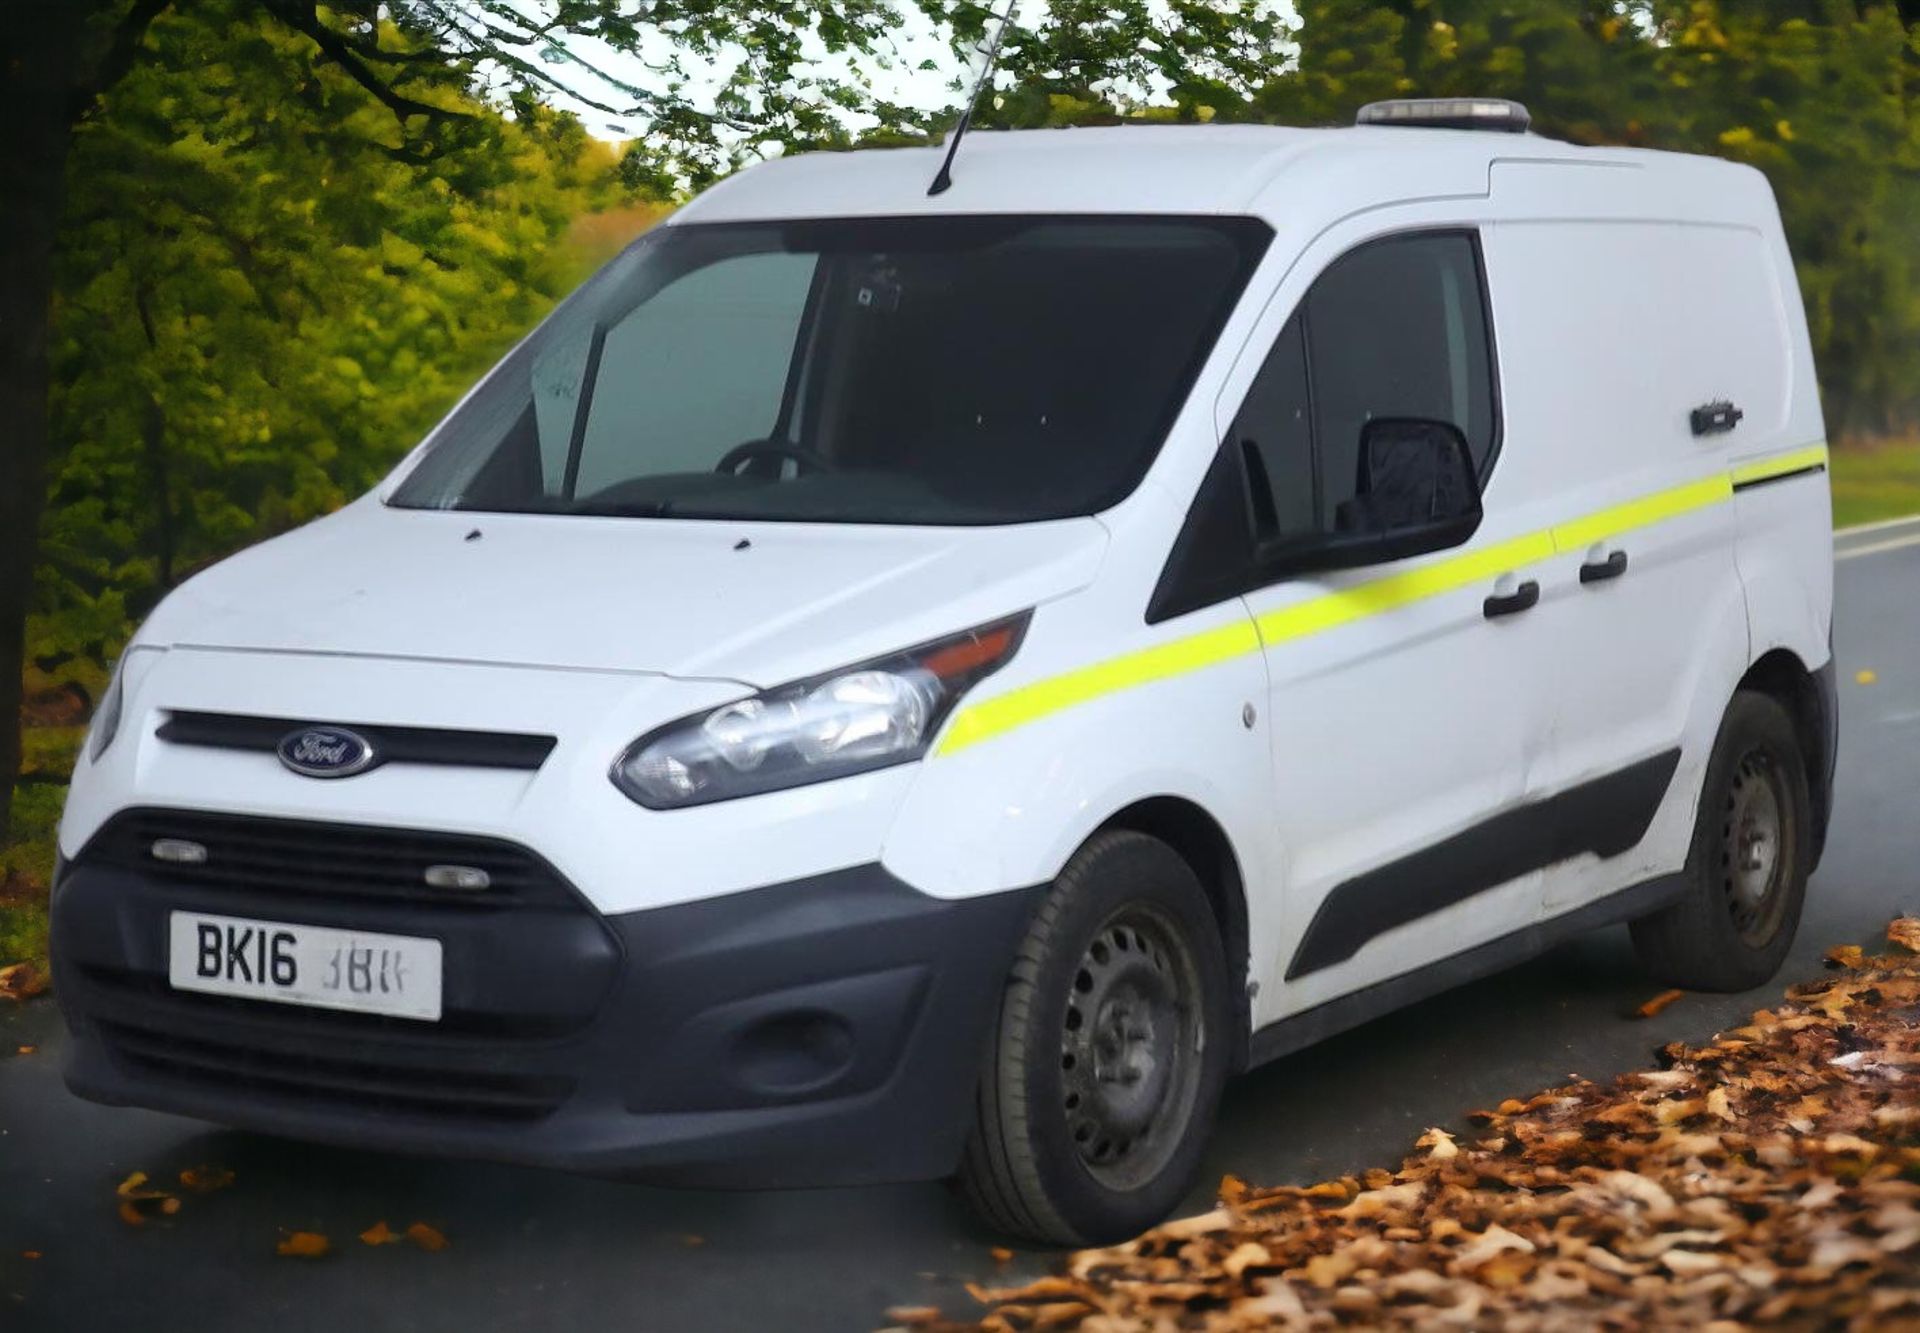 FORD TRANSIT CONNECT ECONETIC SWB PANEL VAN: COMPACT AND EFFICIENT WORKHORSE